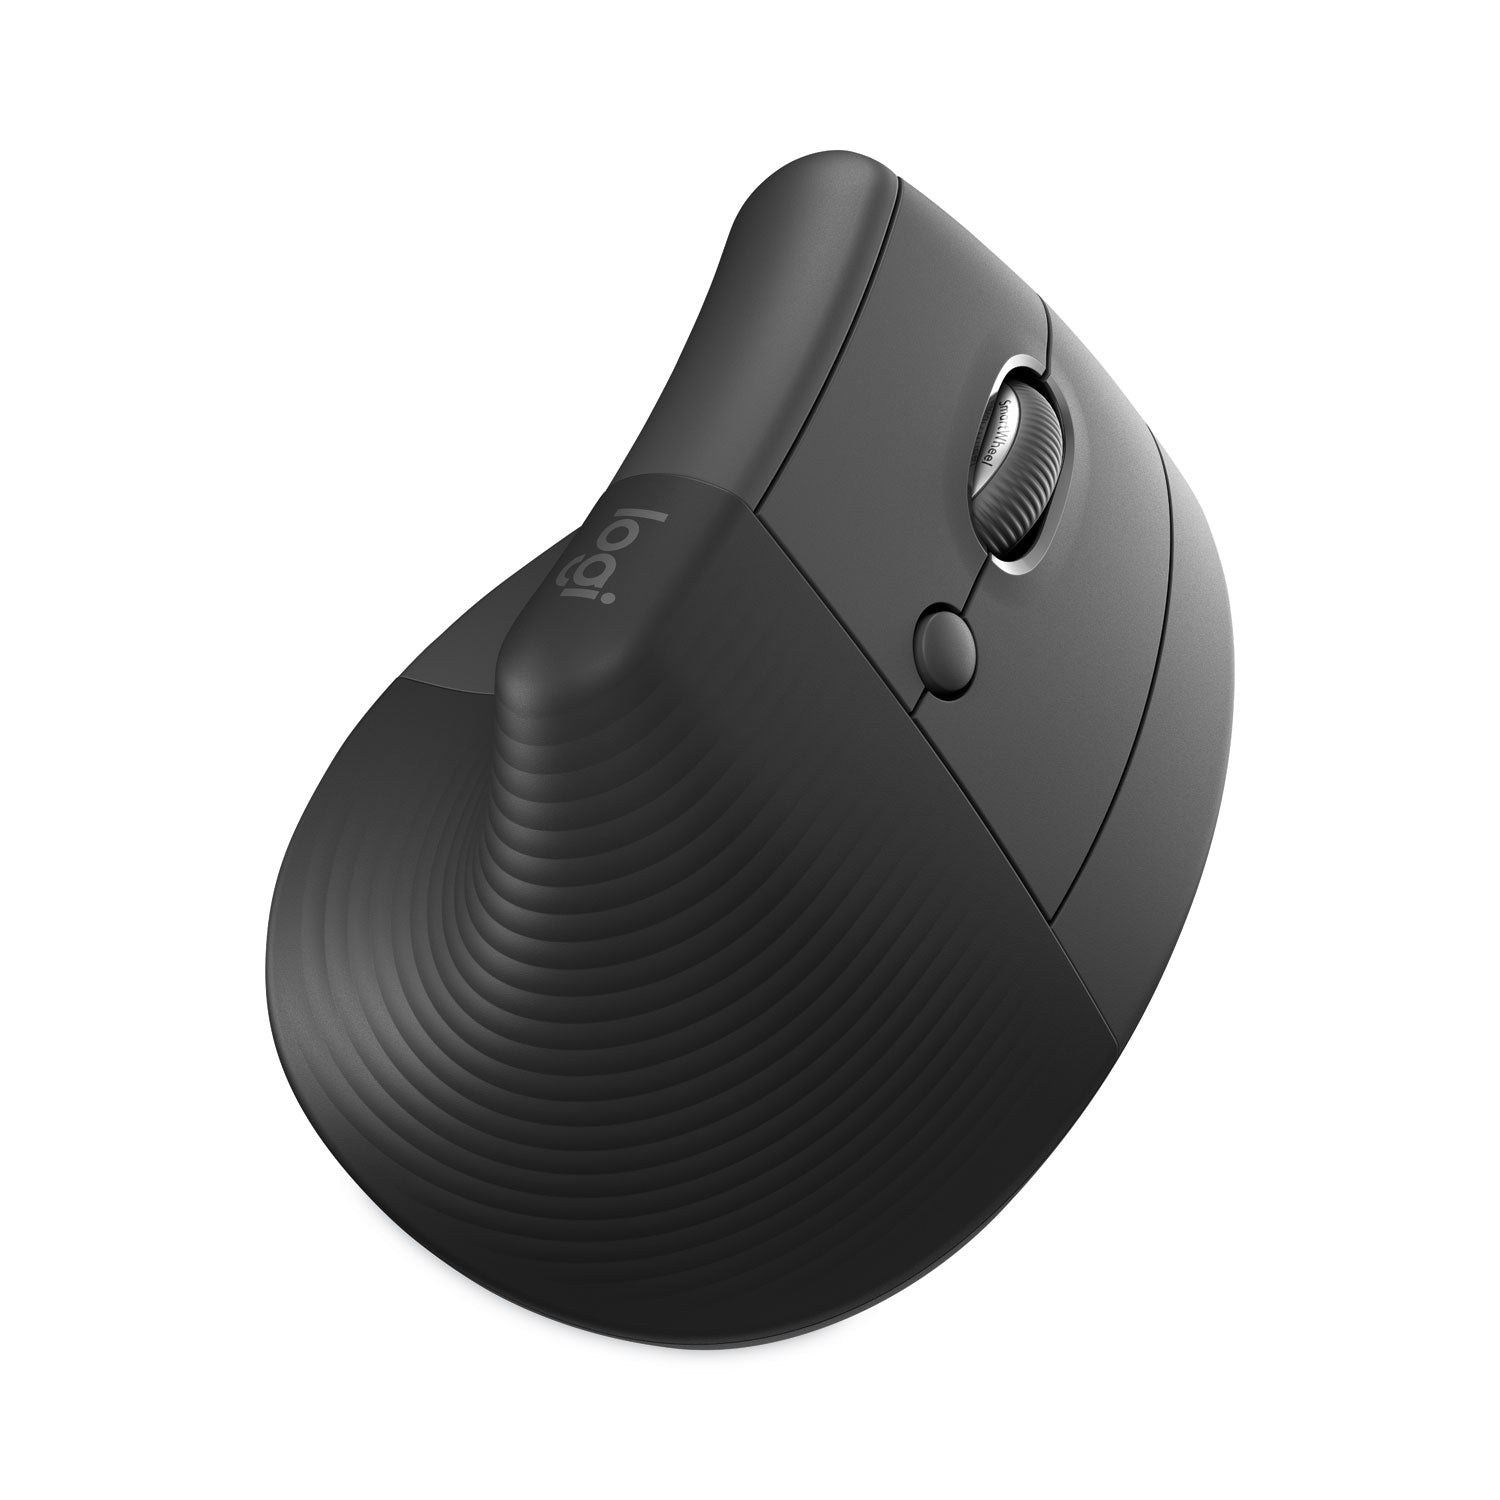 lift-vertical-ergonomic-mouse-24-ghz-frequency-32-ft-wireless-range-right-hand-use-graphite_log910006466 - 5